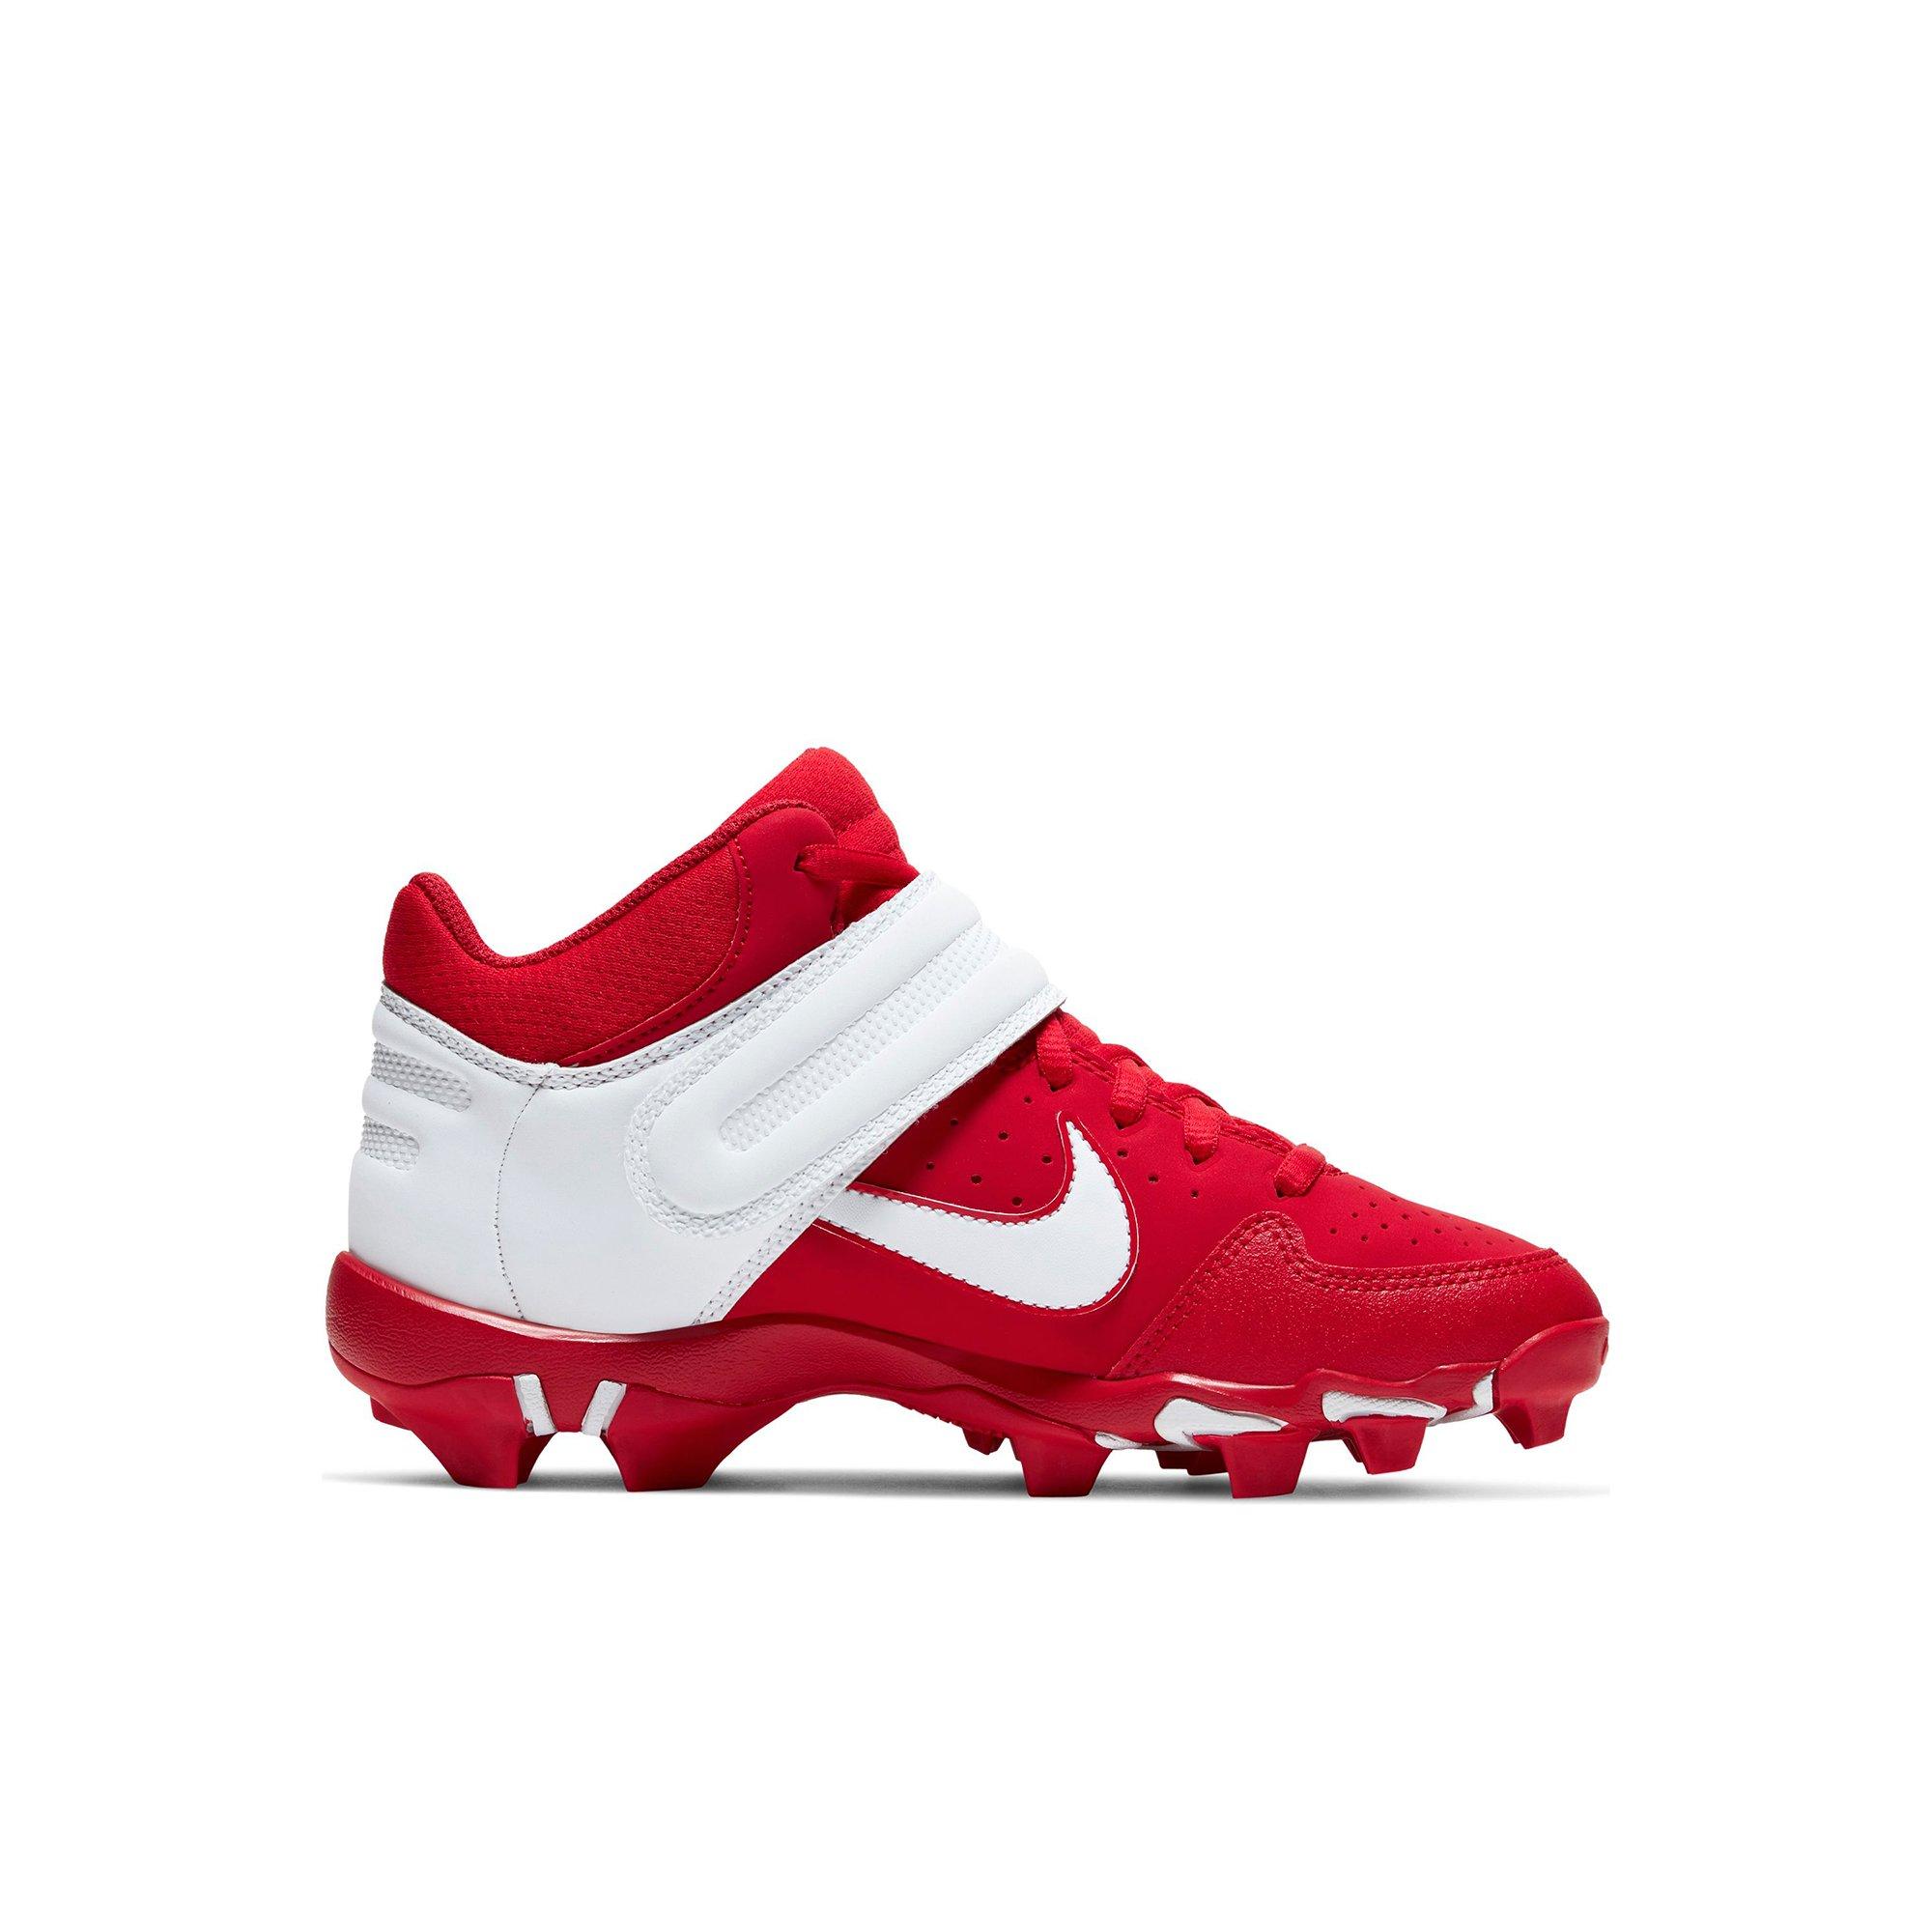 red white and blue nike baseball cleats 